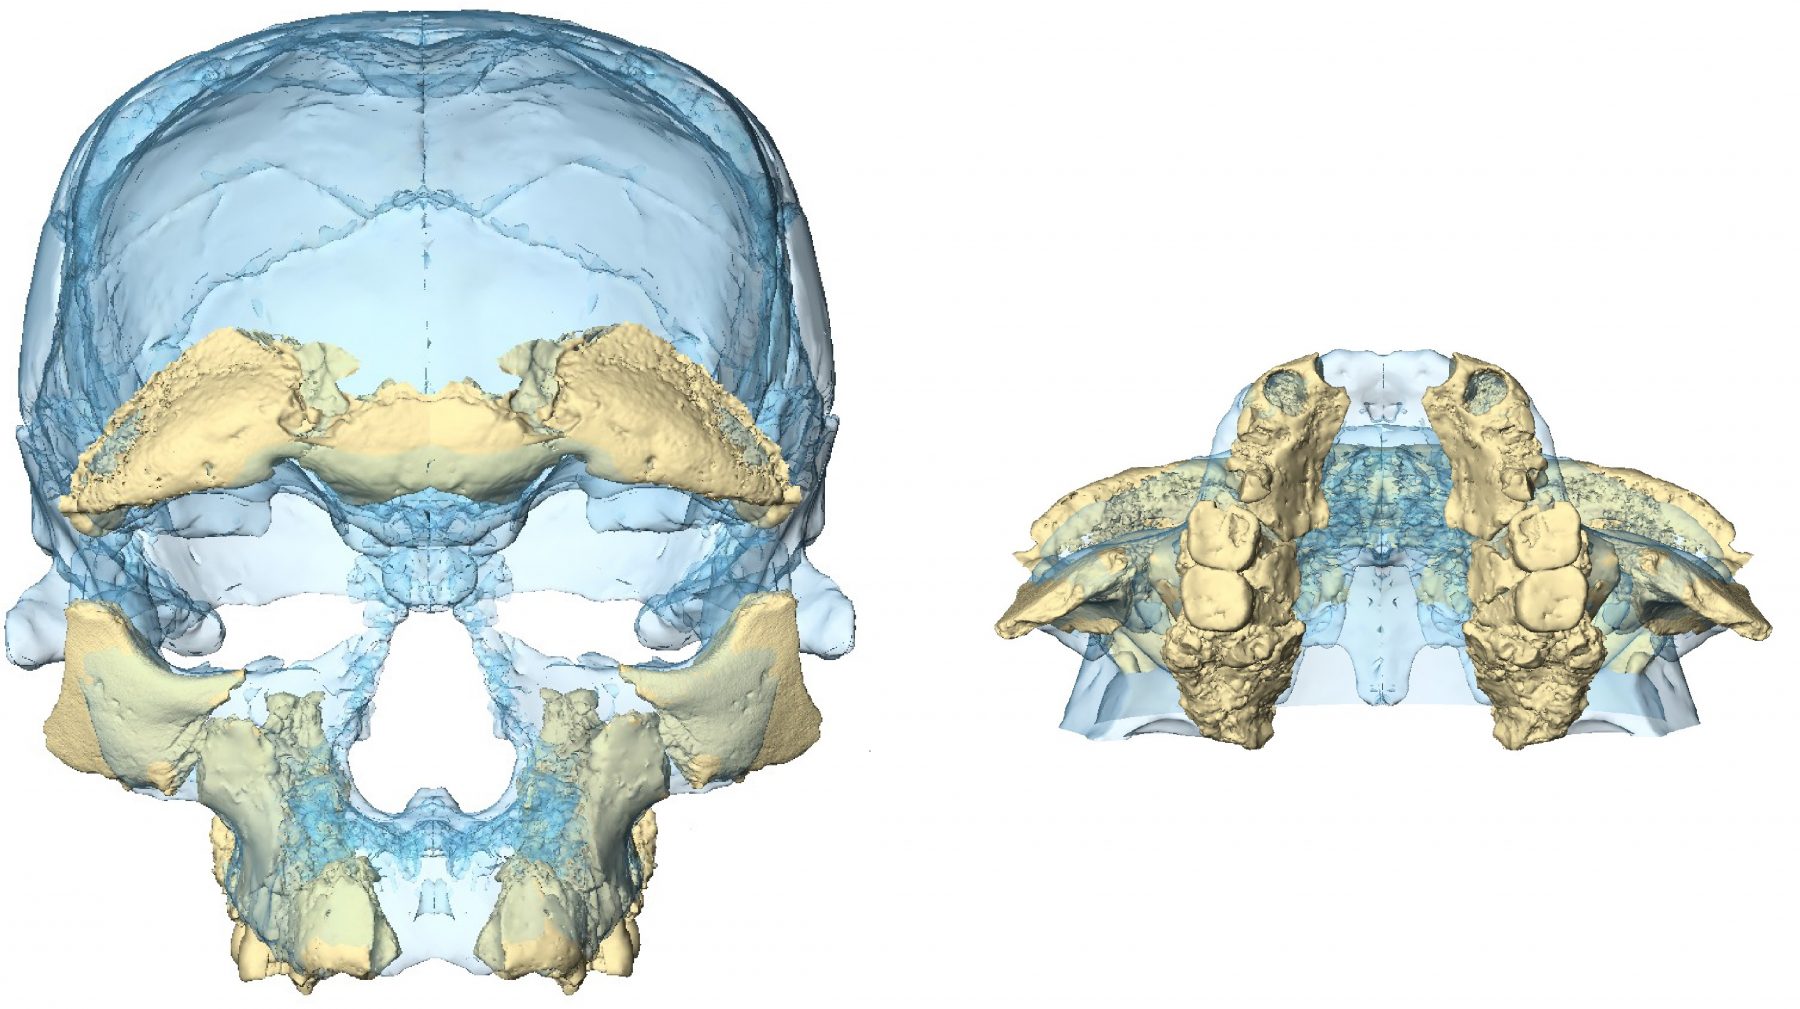 Facial reconstruction of the found fragments of a skull at Jebel Irhoud, Morocc. Credit: Hublin/Ben-Ncer/Bailey/et al./Nature